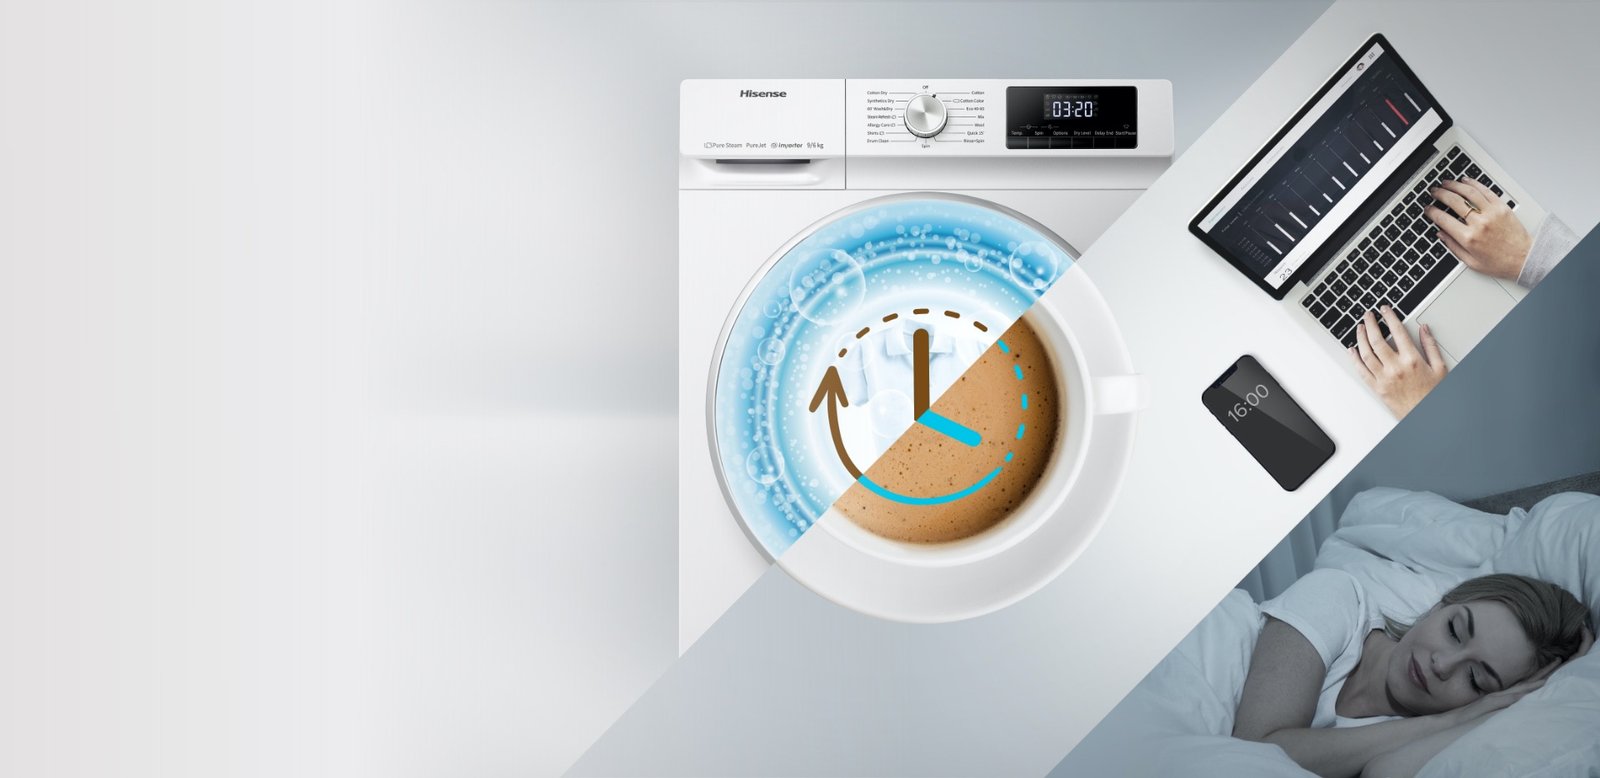 Hisense 6kg Front Load Washing Machine Product Review